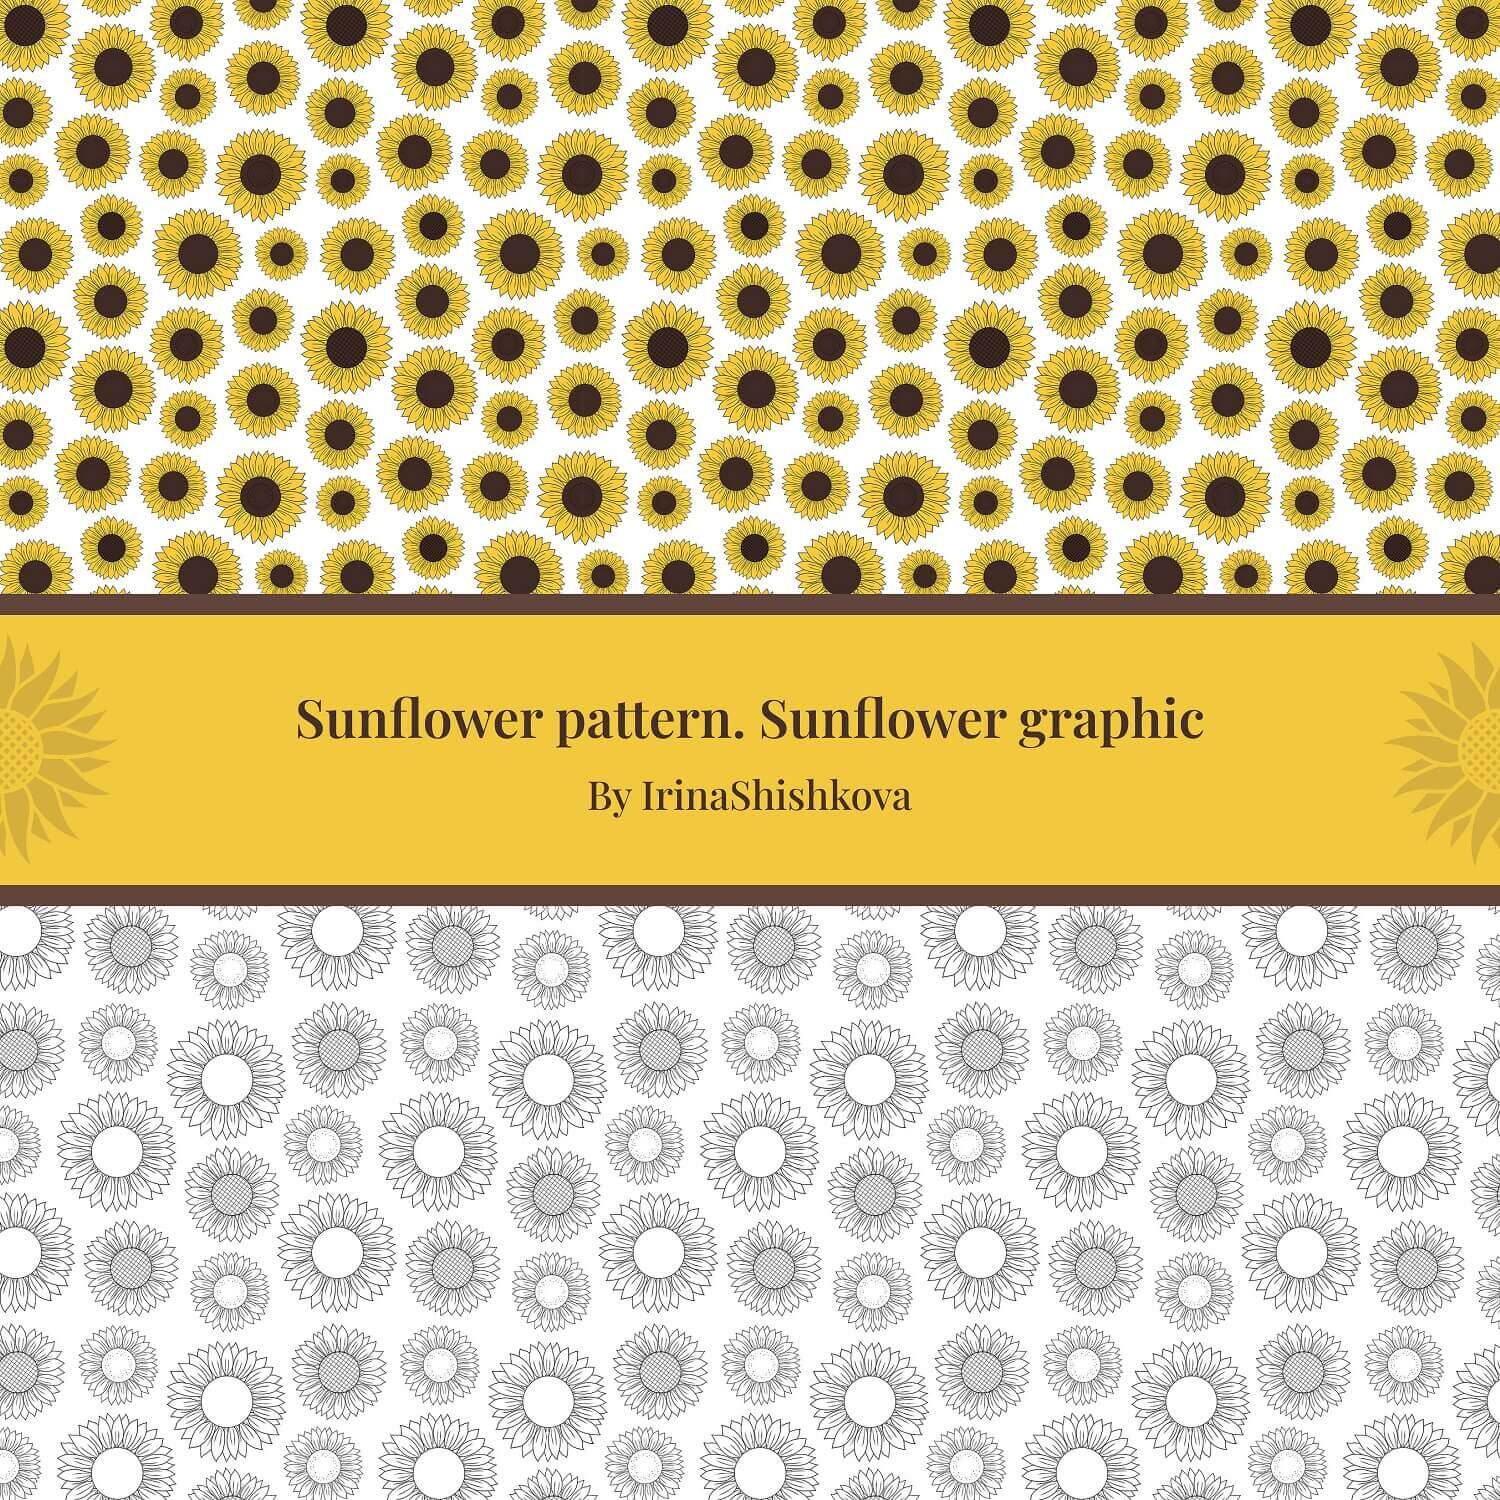 Sunflower pattern on yellow background. sunflower graphic on yellow and blue color.